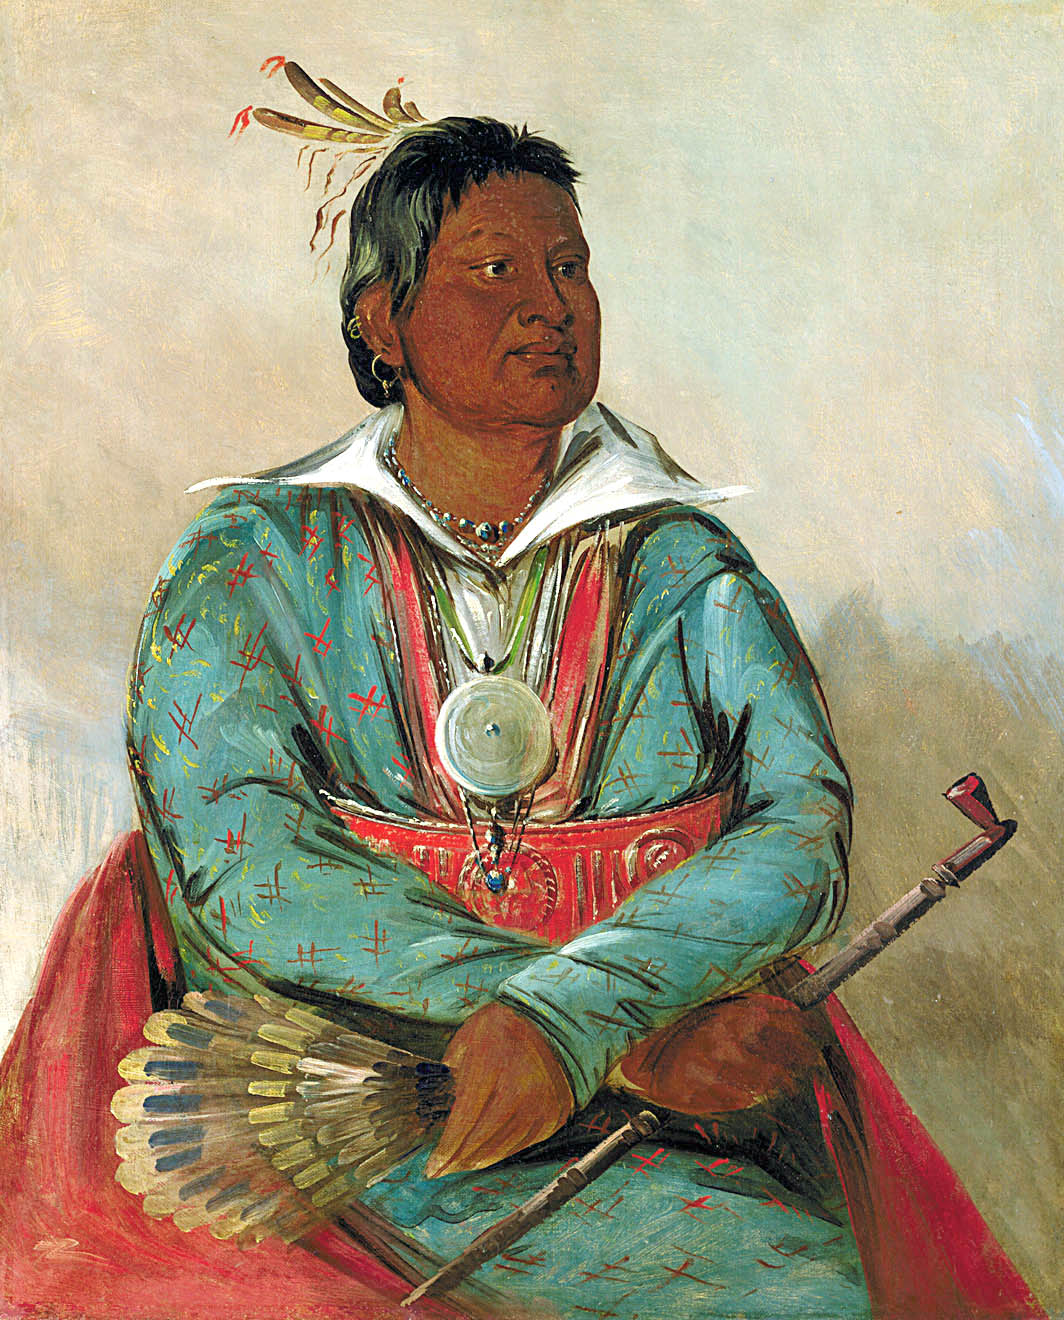 Mó-sho-la-túb-bee, He Who Puts Out and Kills, Chief of the (Choctaw) Tribe, by George Catlin, 1834